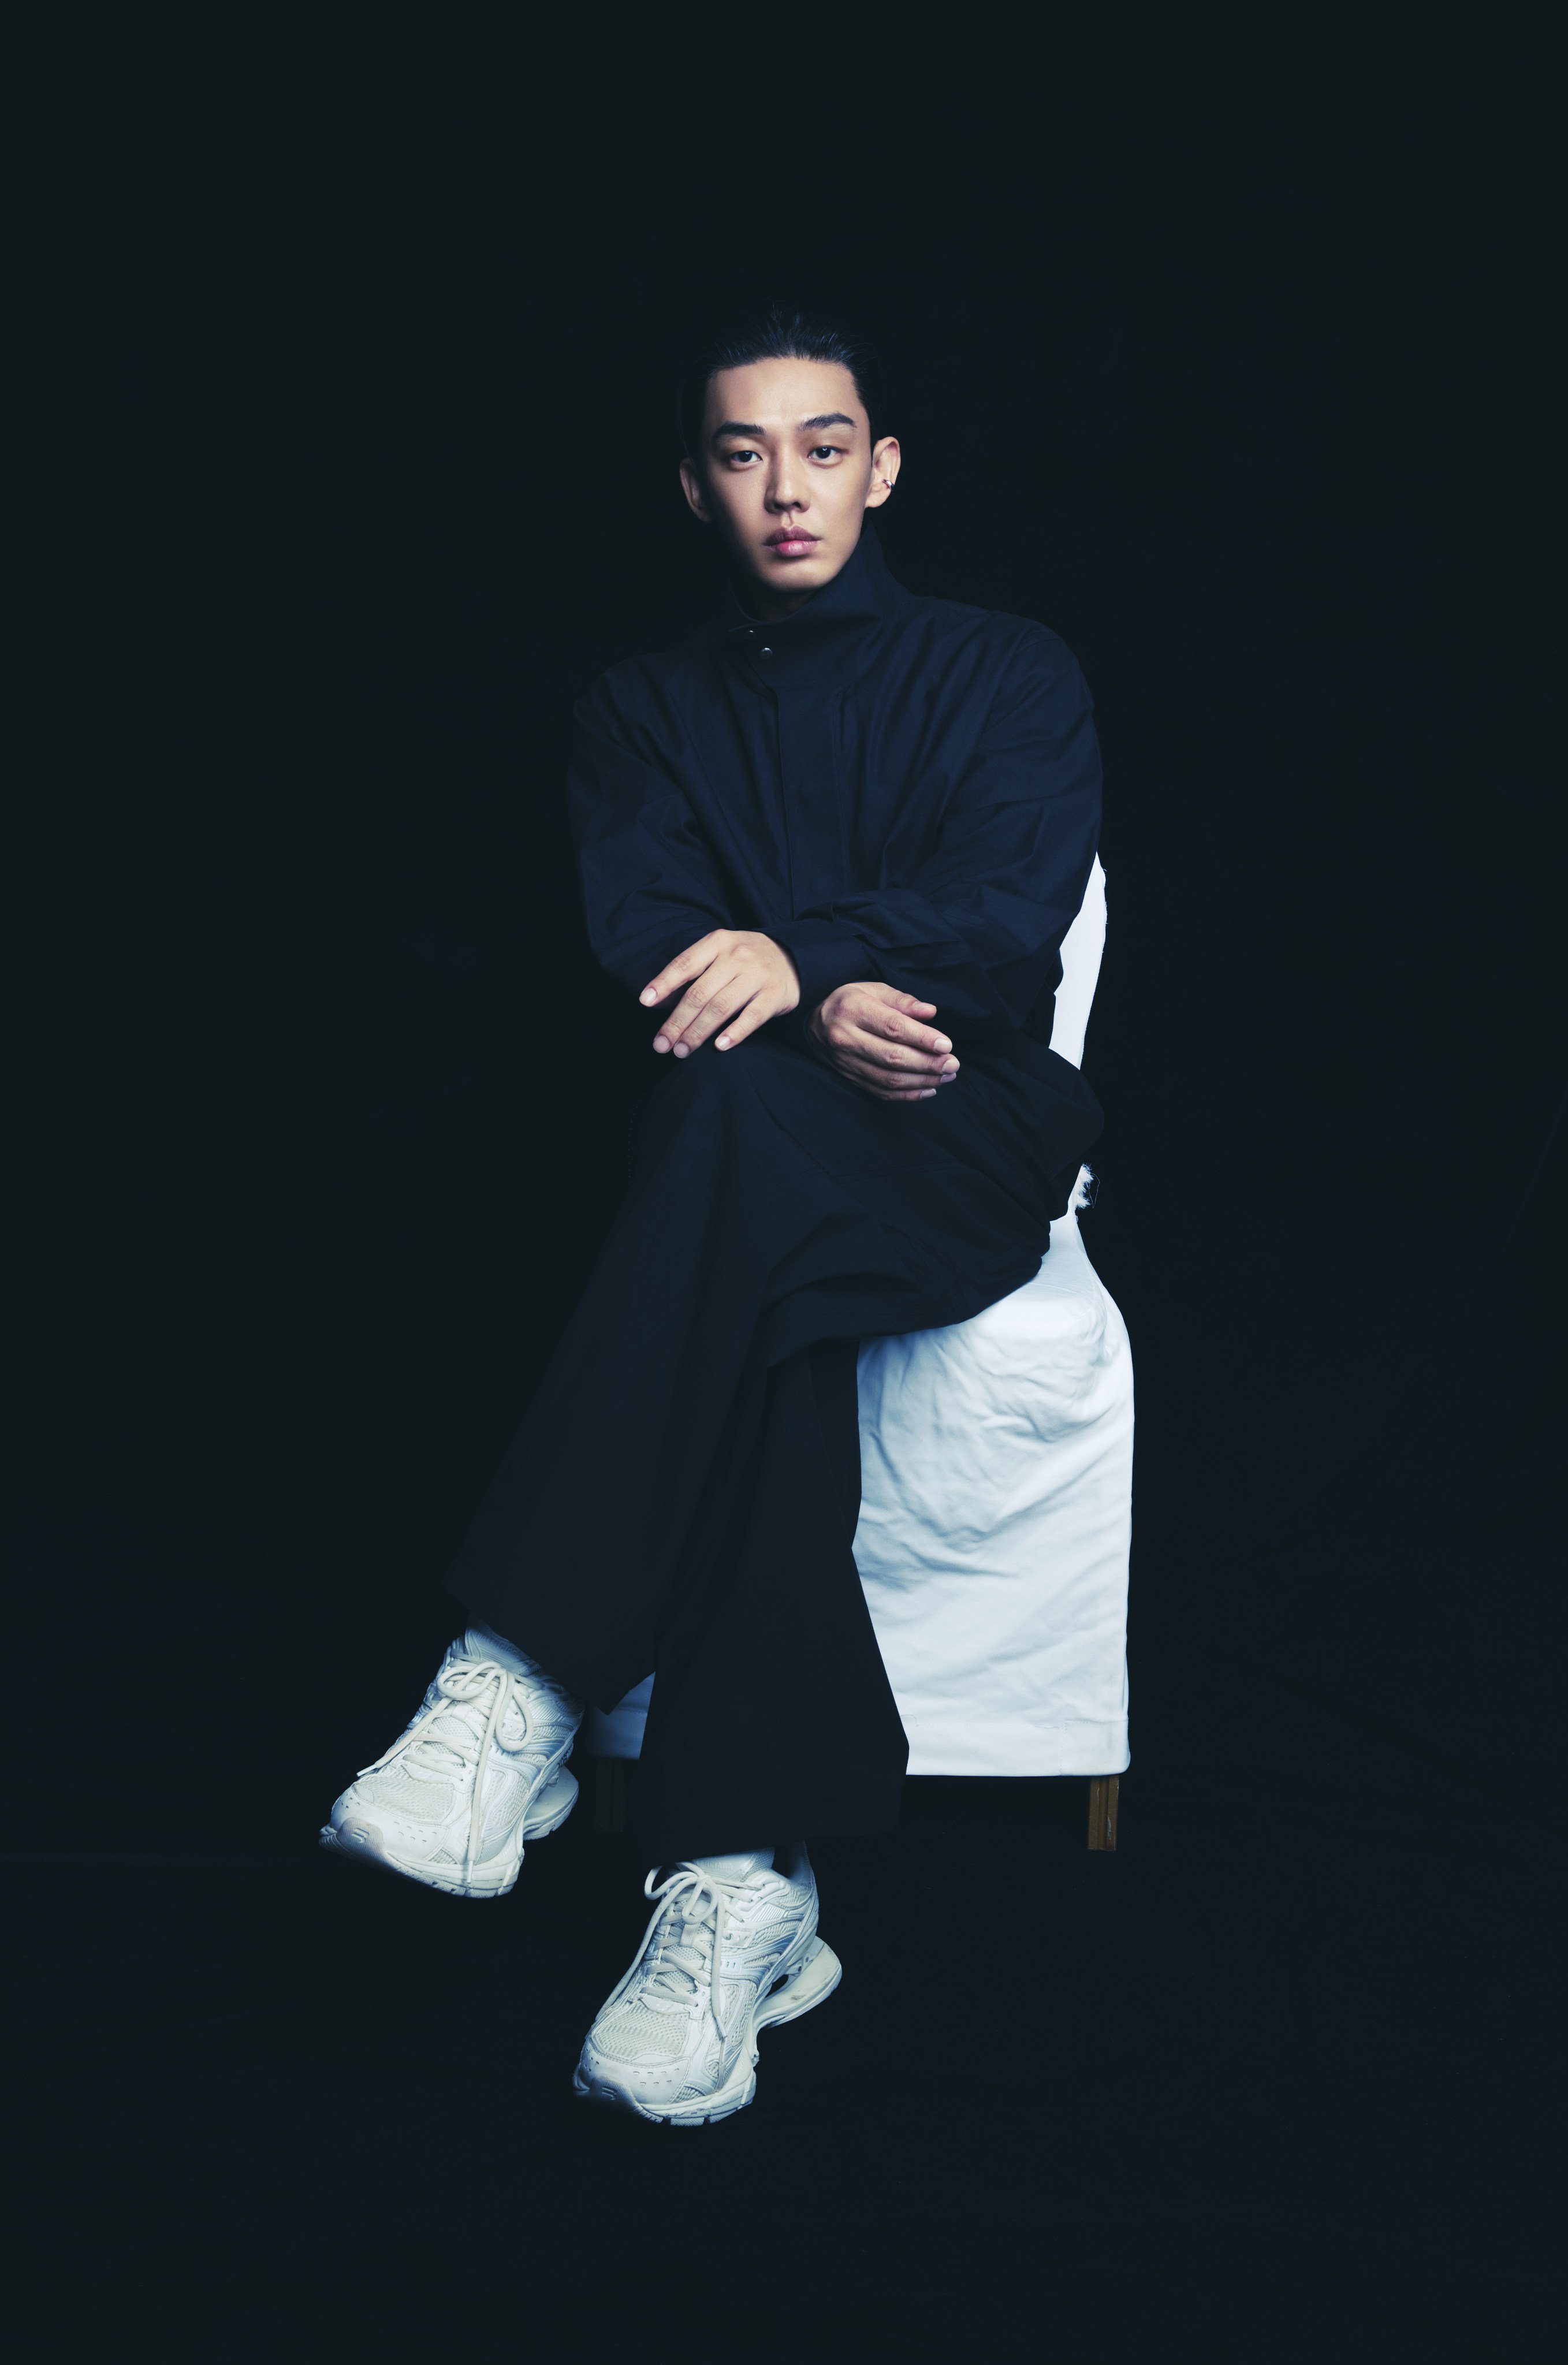 Yoo Ah-in’s management company said the actor has been faithfully cooperating with the investigation. Photo: Netflix